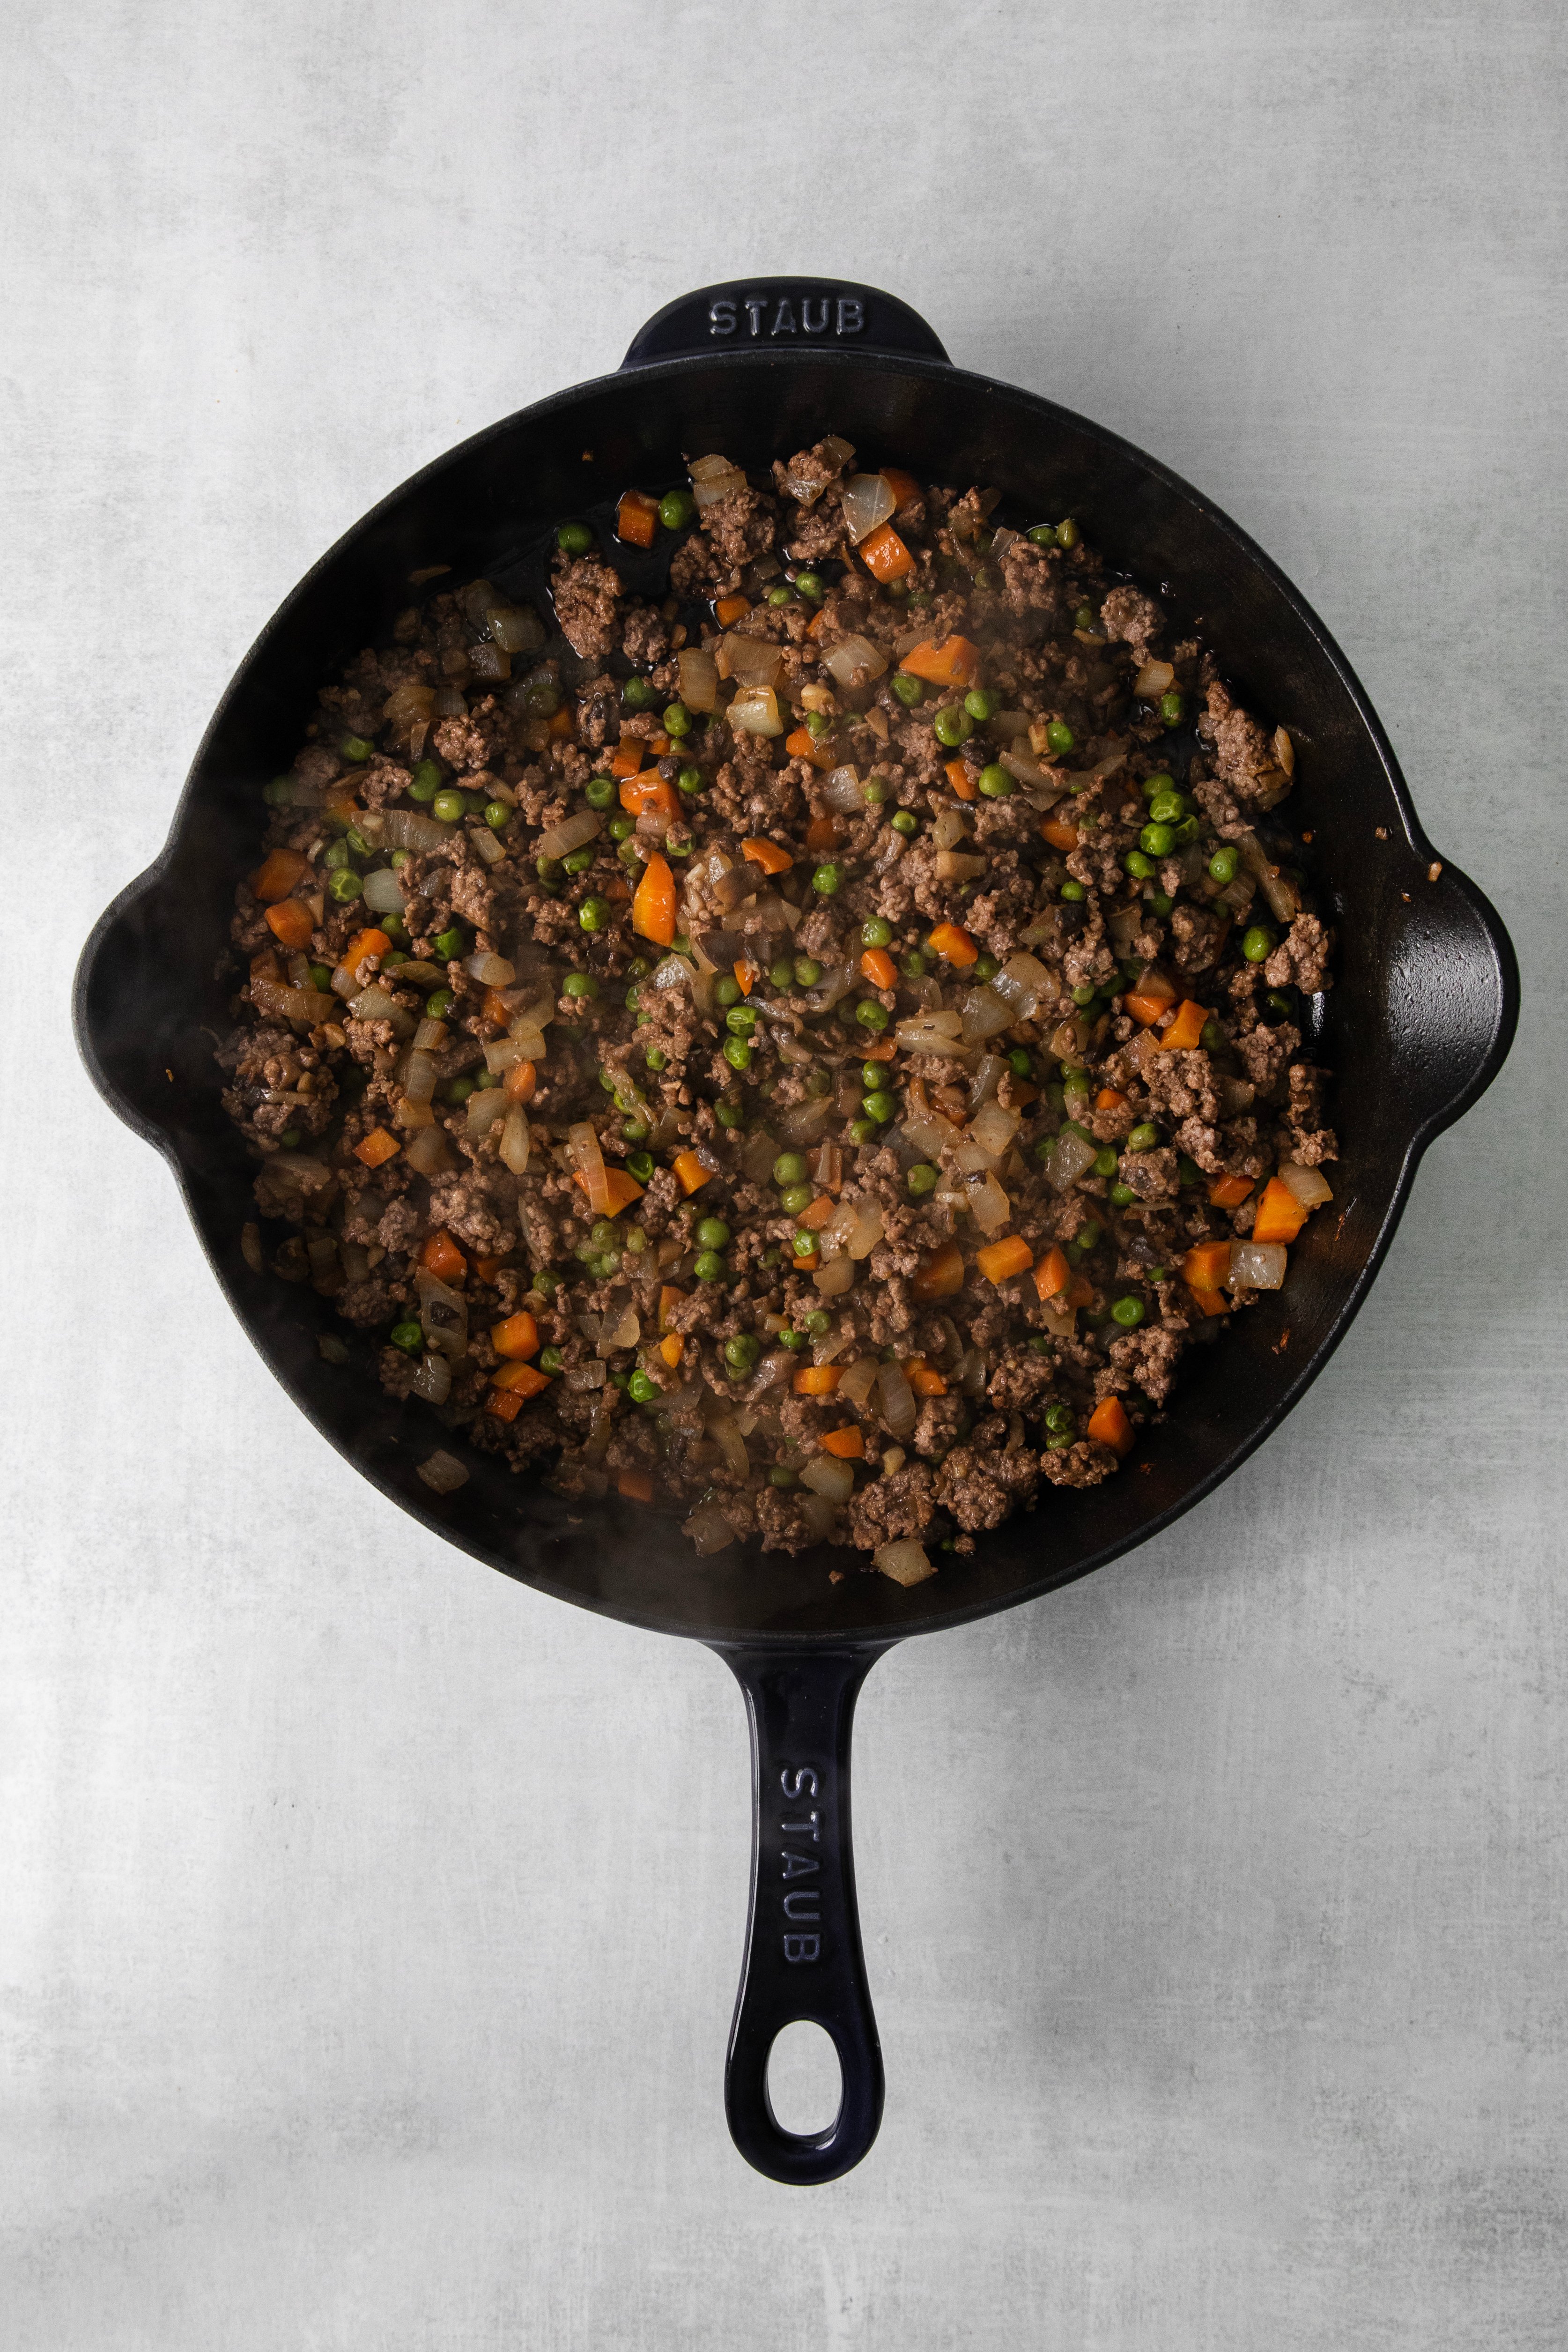 Minced meat and vegetables in a pan.